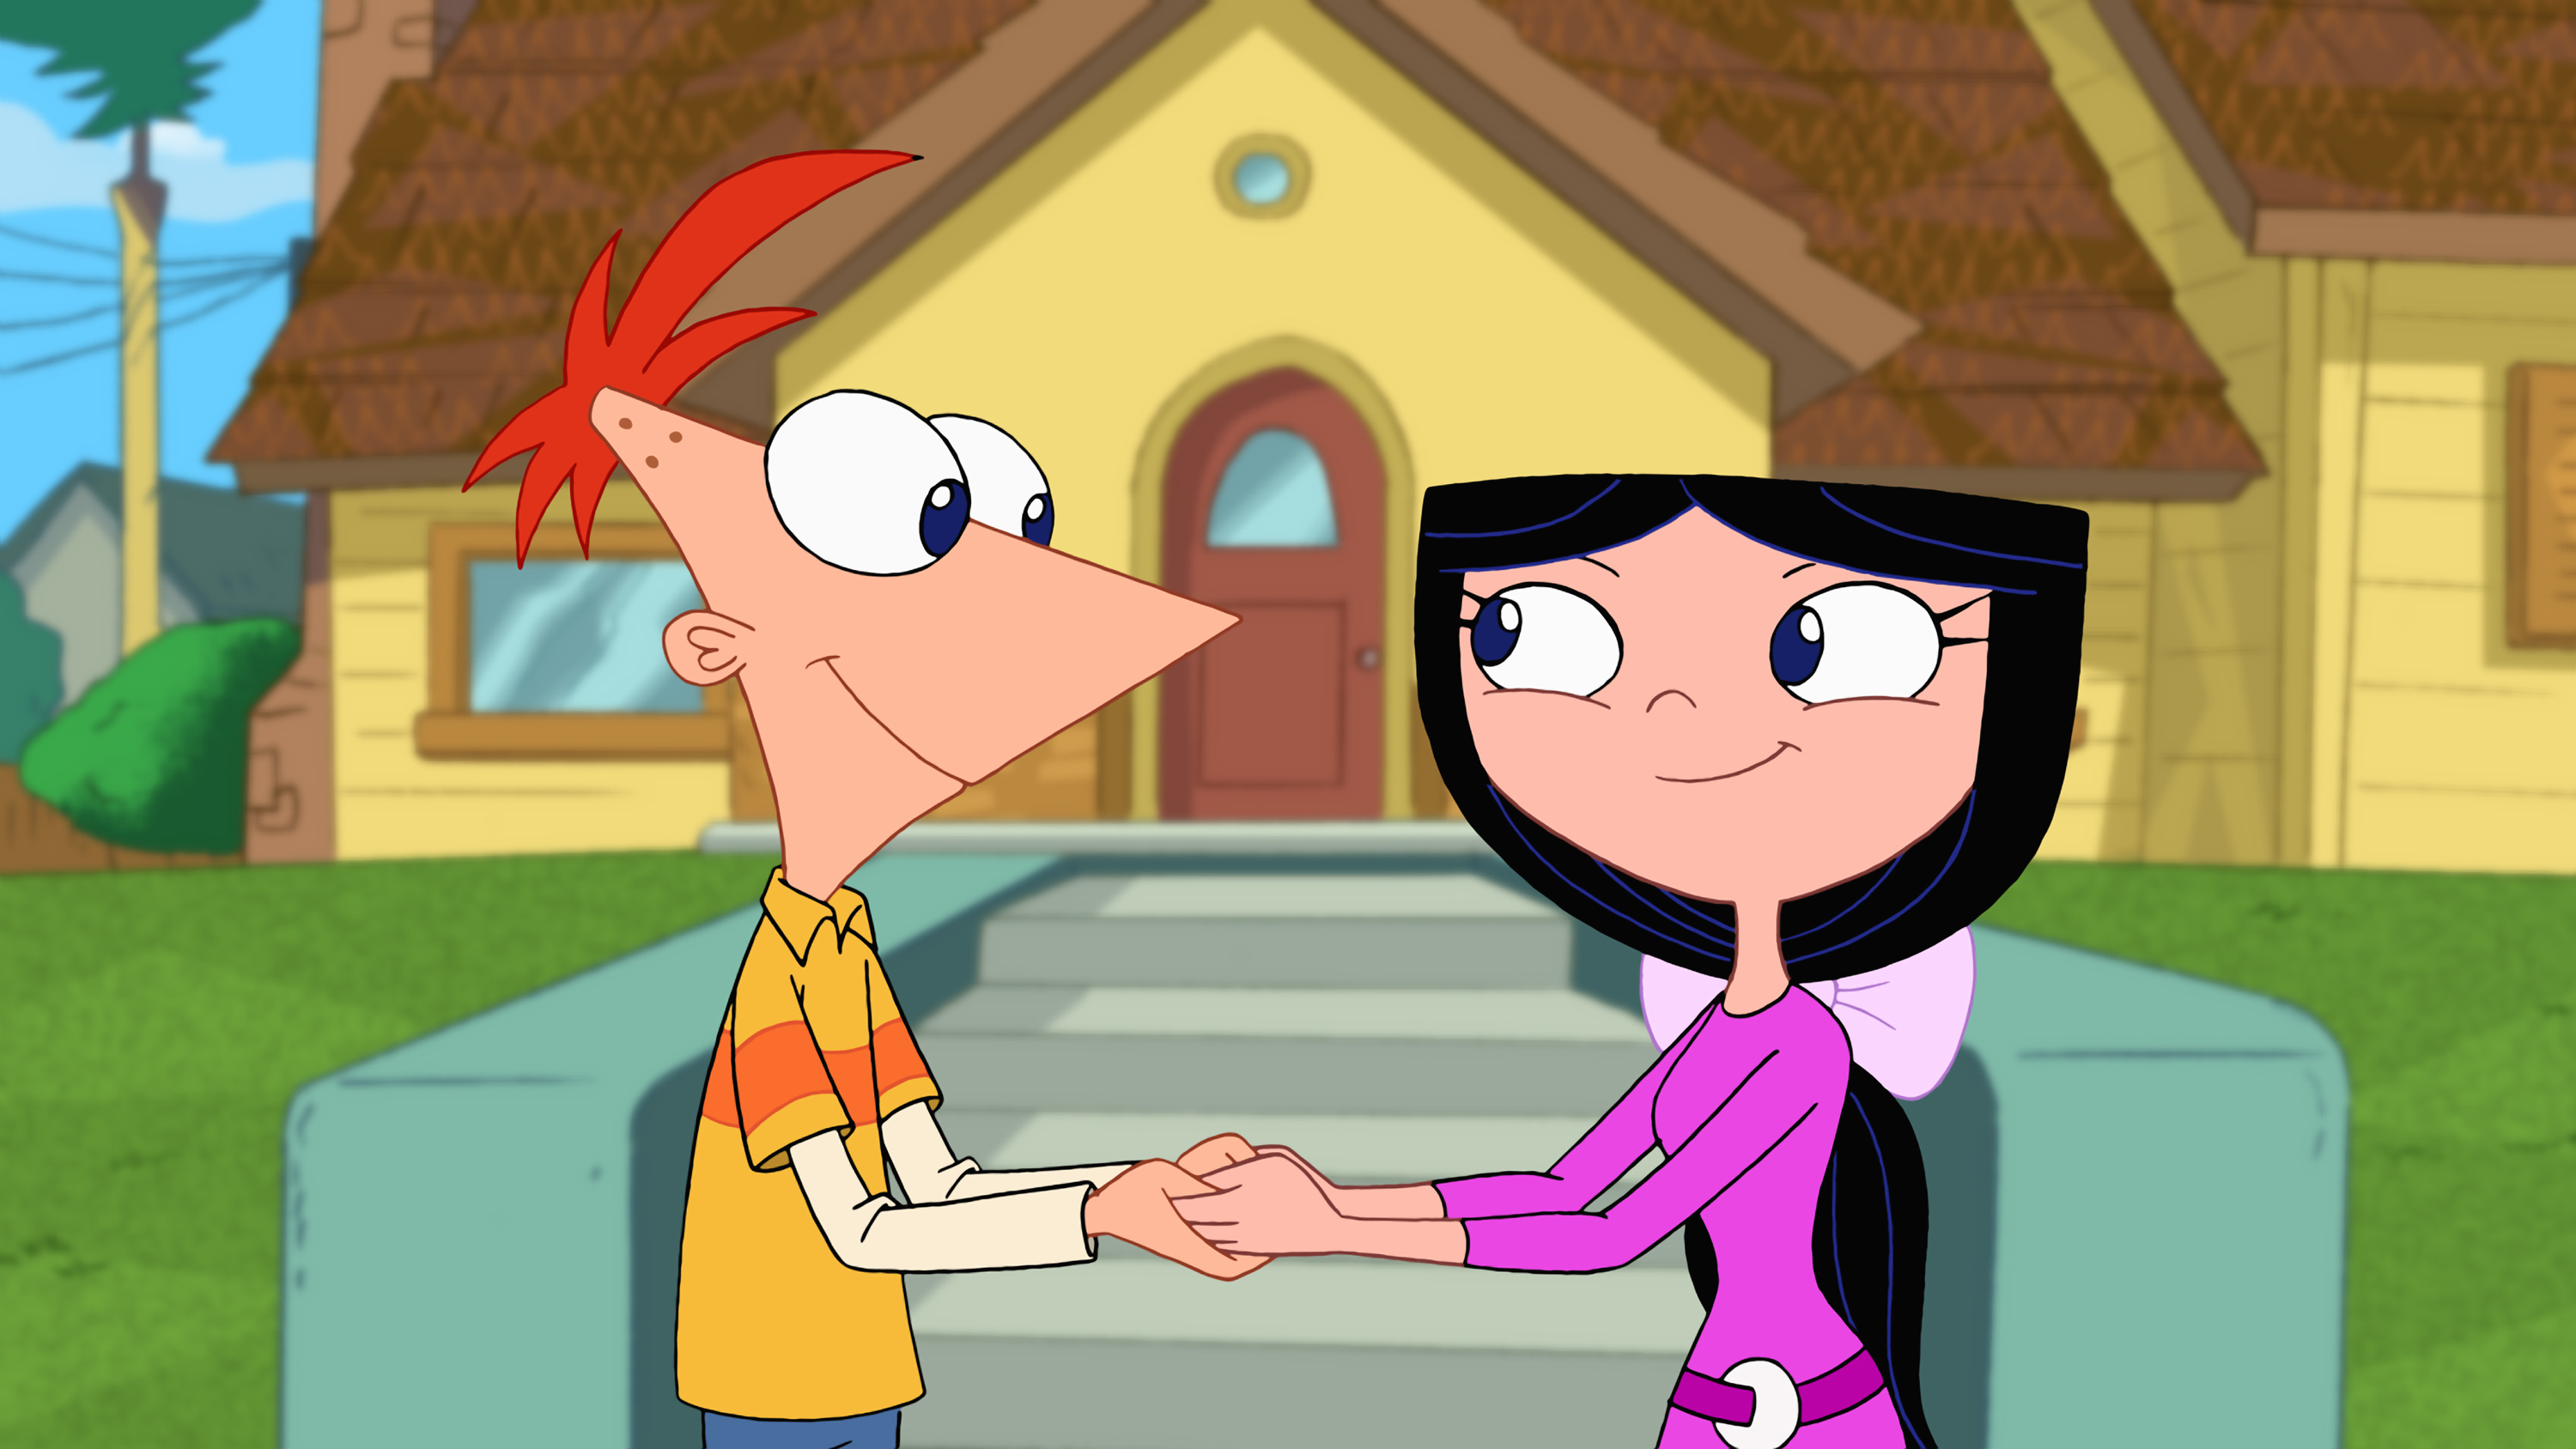 Phineas And Ferb wallpapers, TV Show, HQ Phineas And Ferb pi